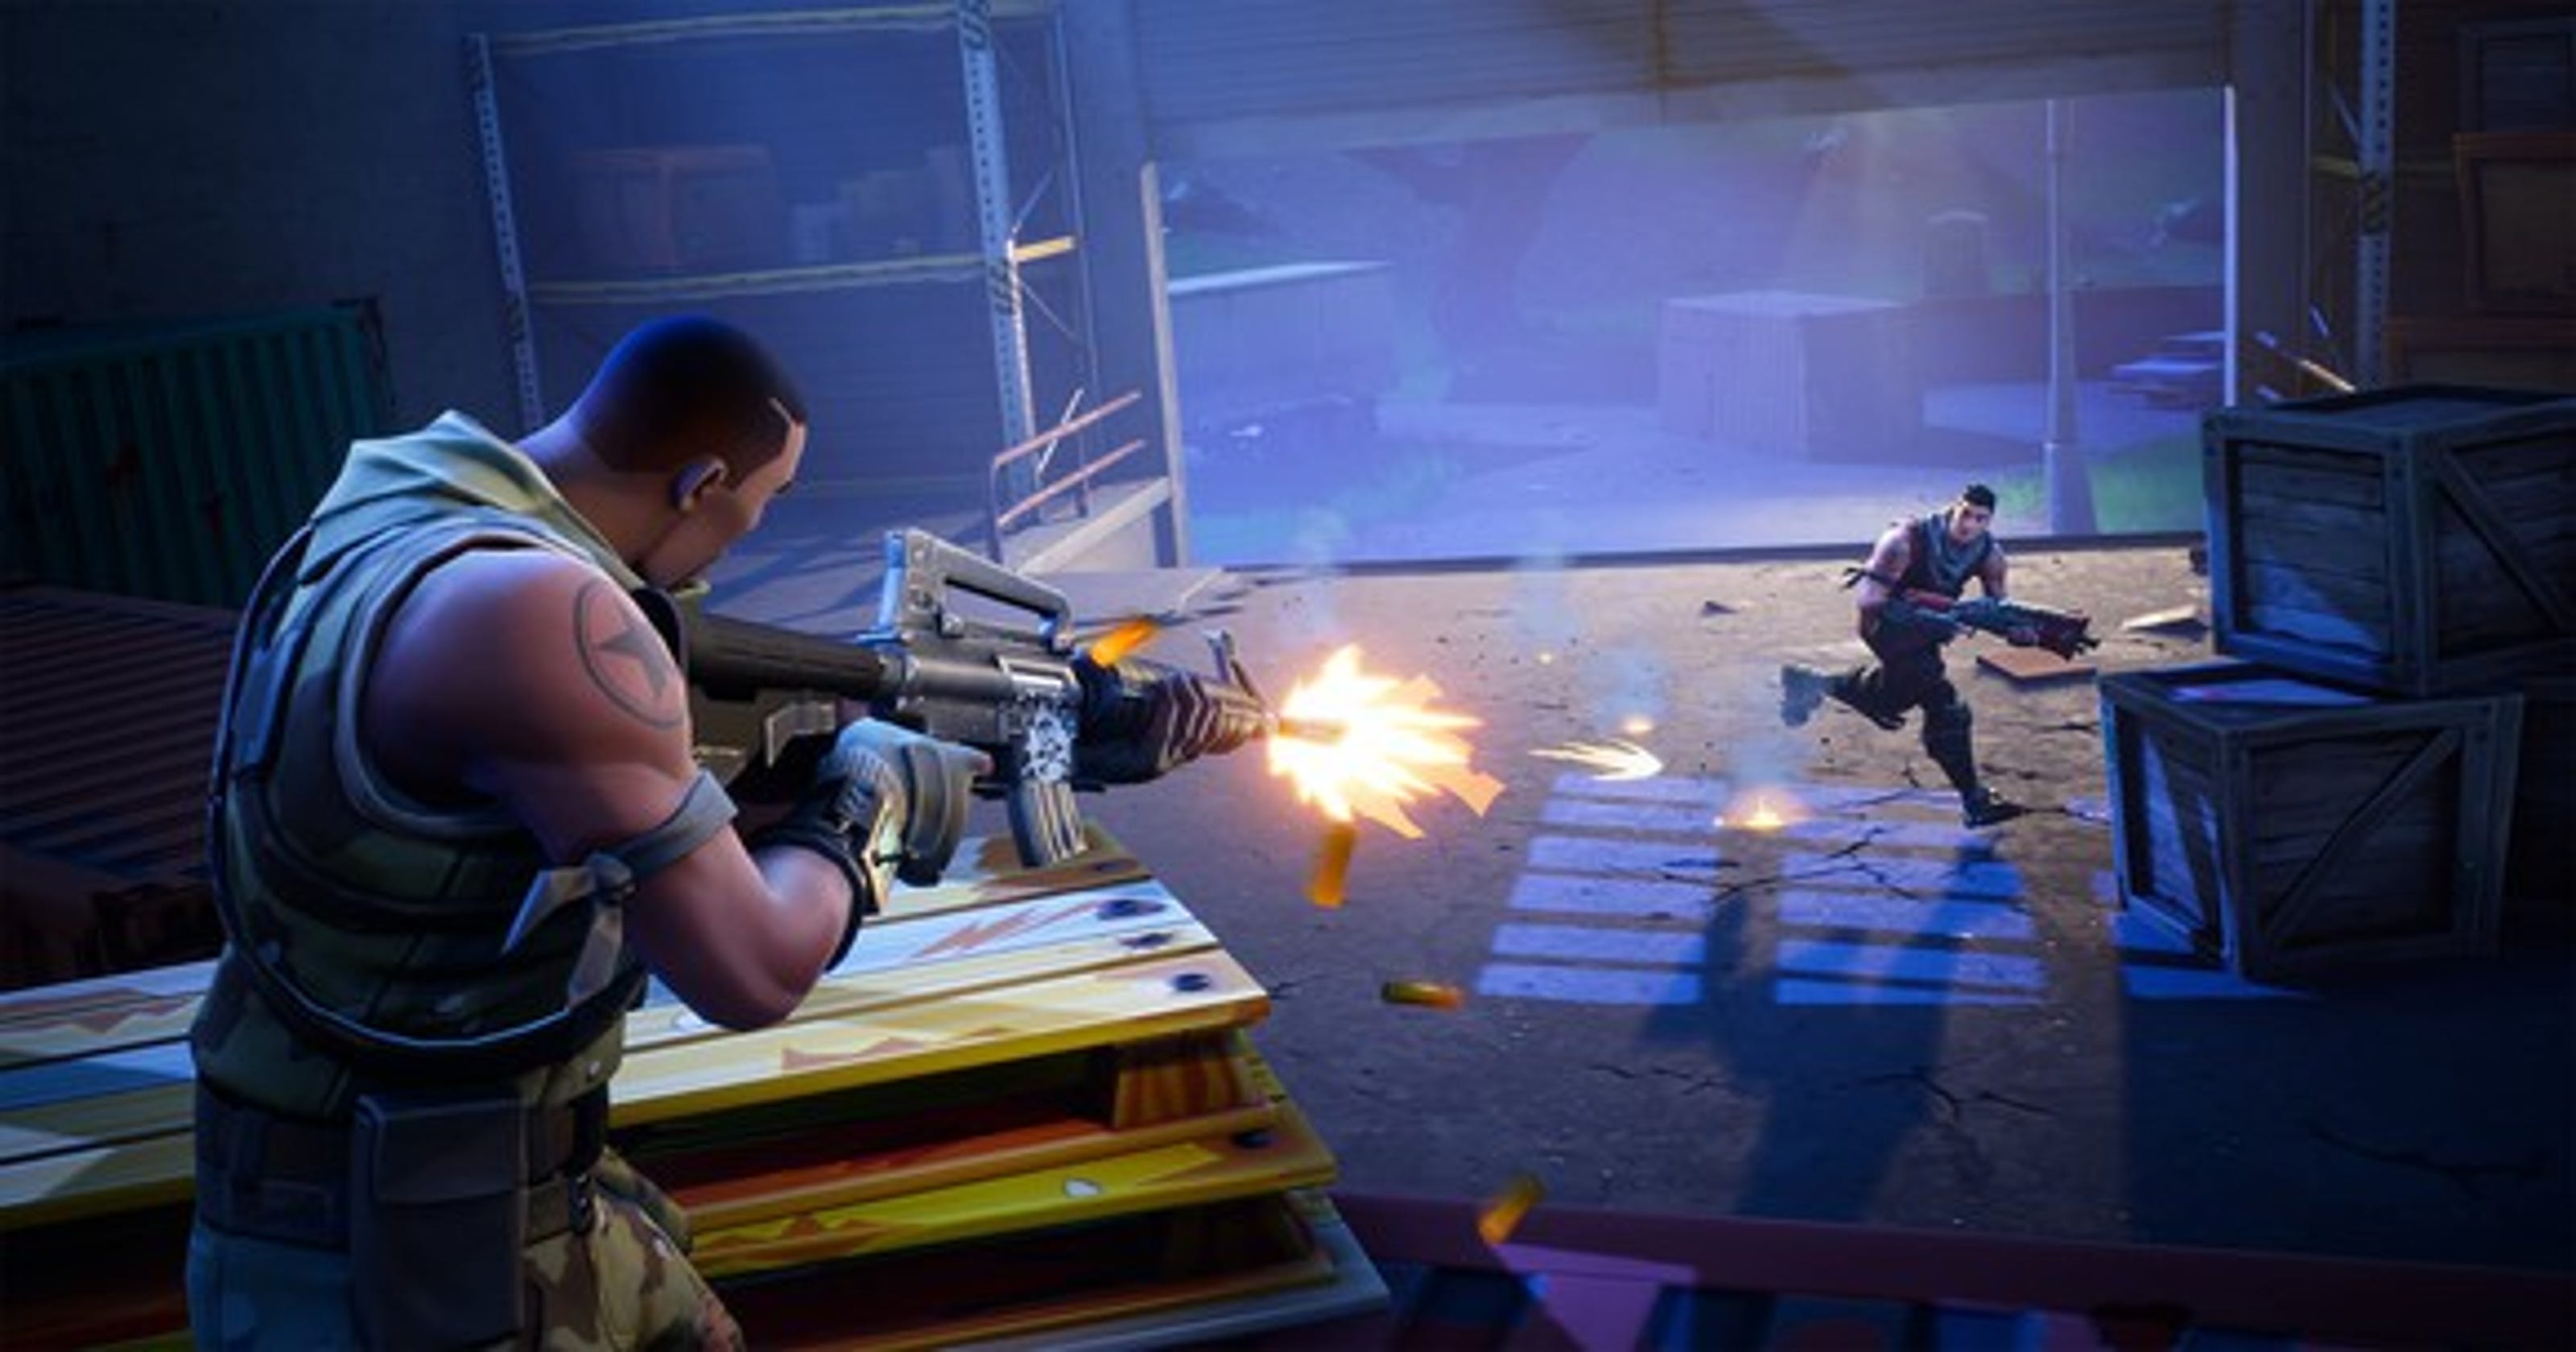 new york man 45 charged with threatening 11 year old over game of fortnite - is fortnite losing players